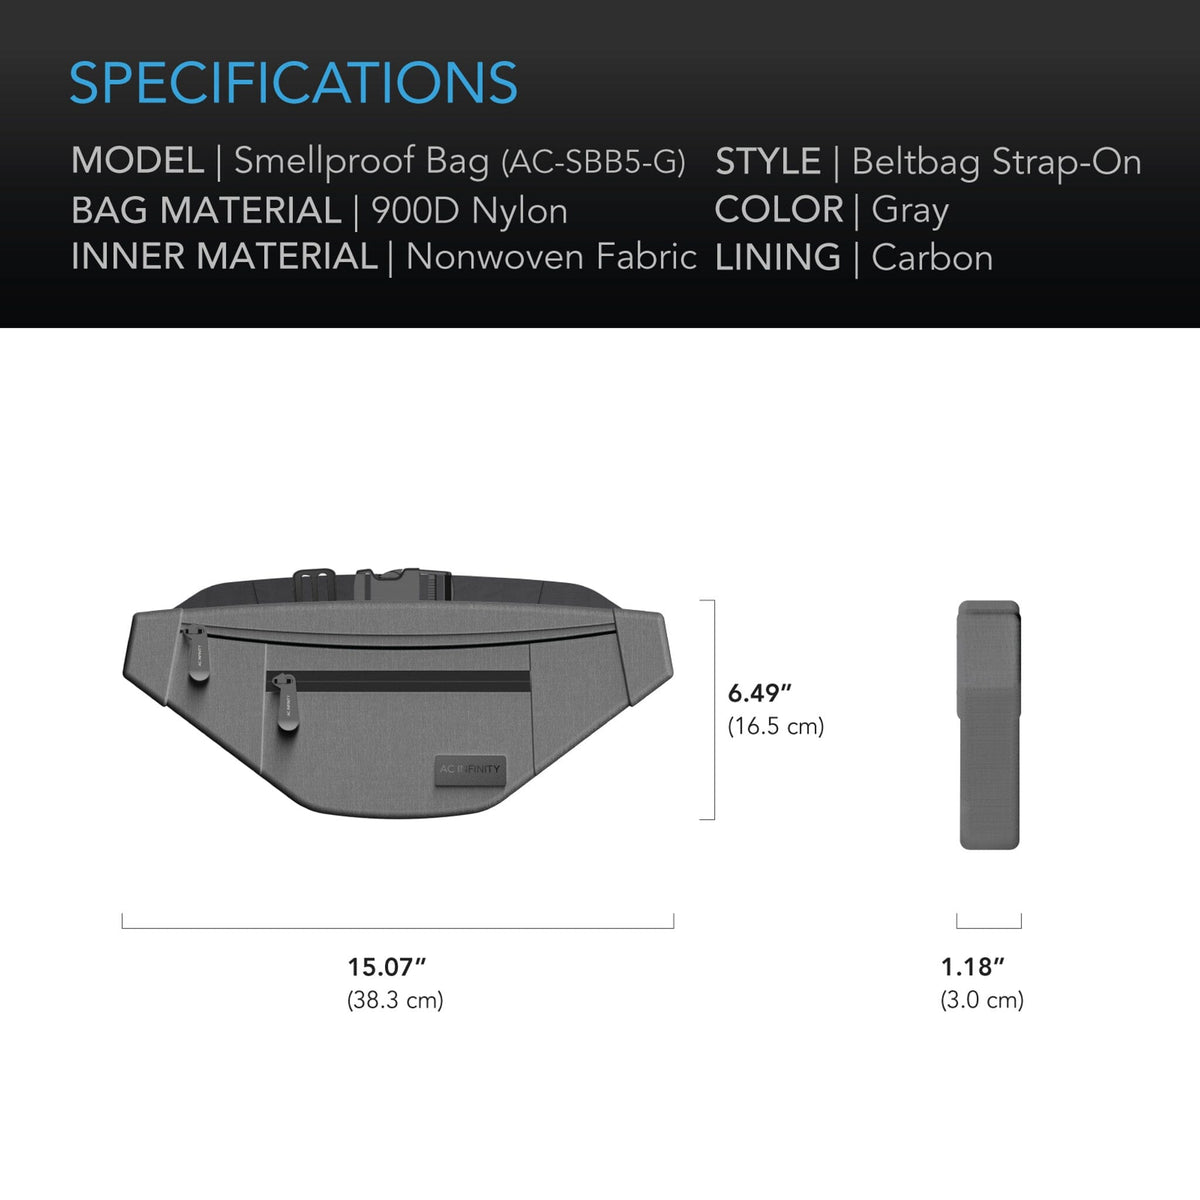 Smell proof bag gray specifications